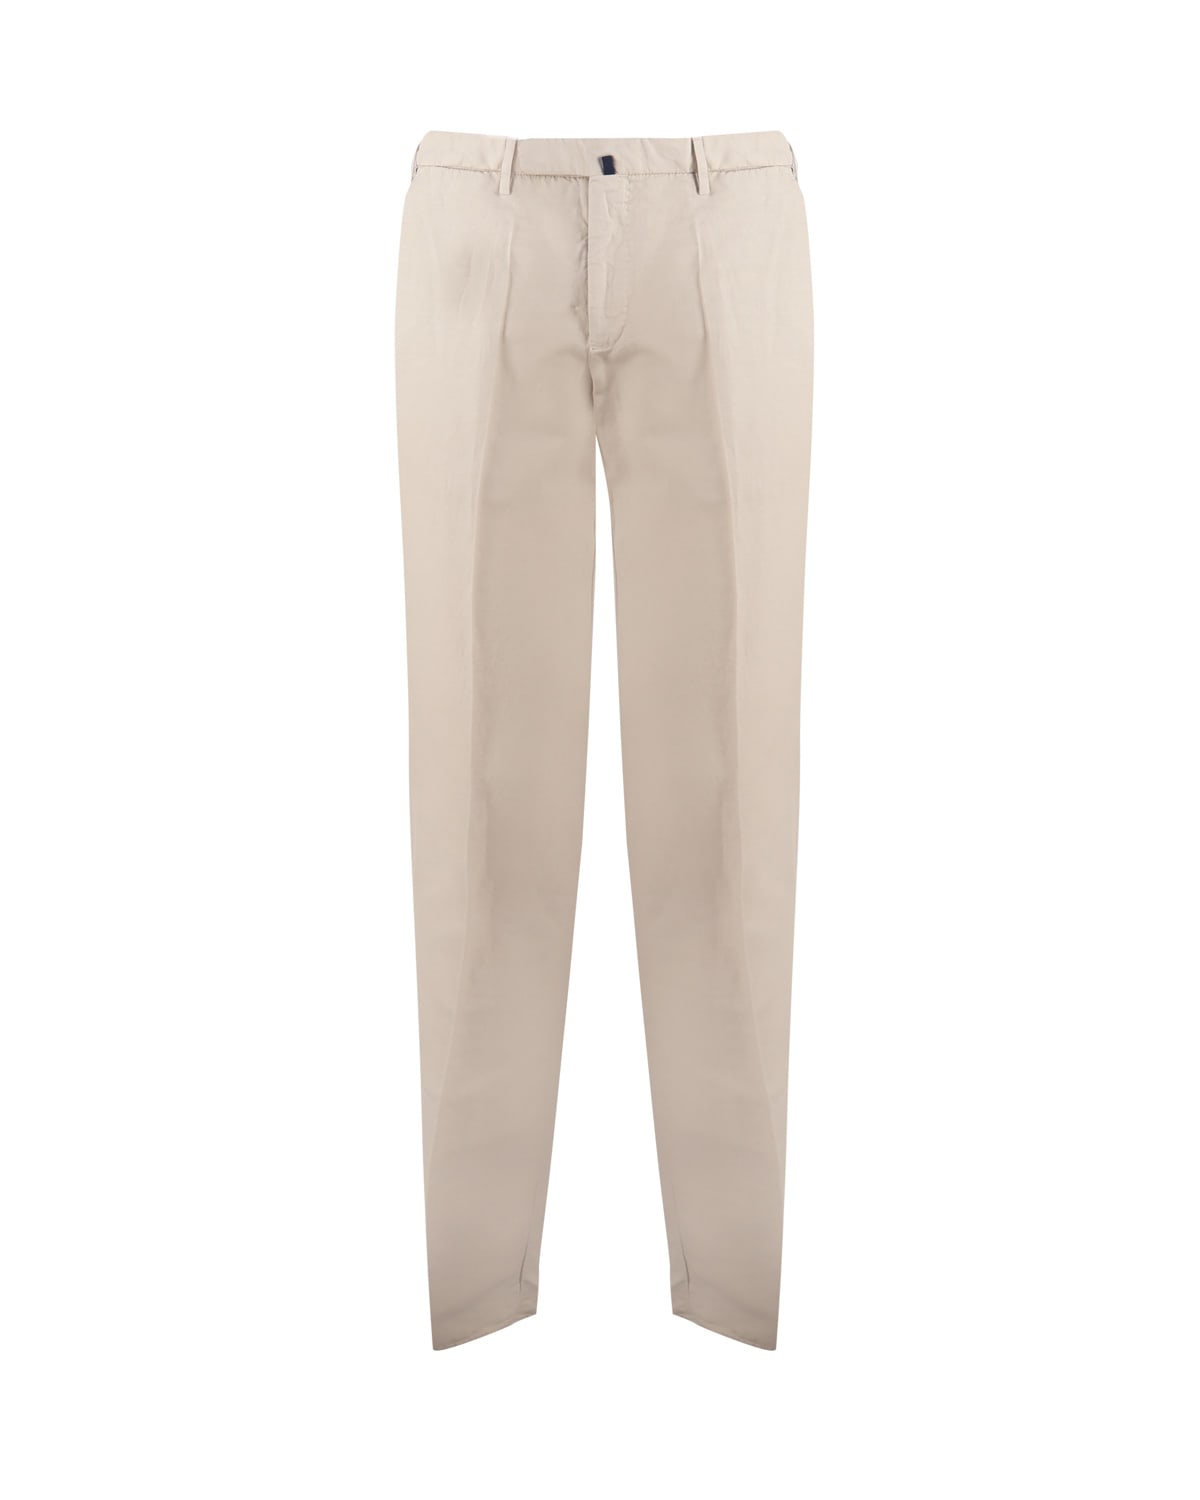 INCOTEX TROUSERS IN COTTON BLEND TWILL